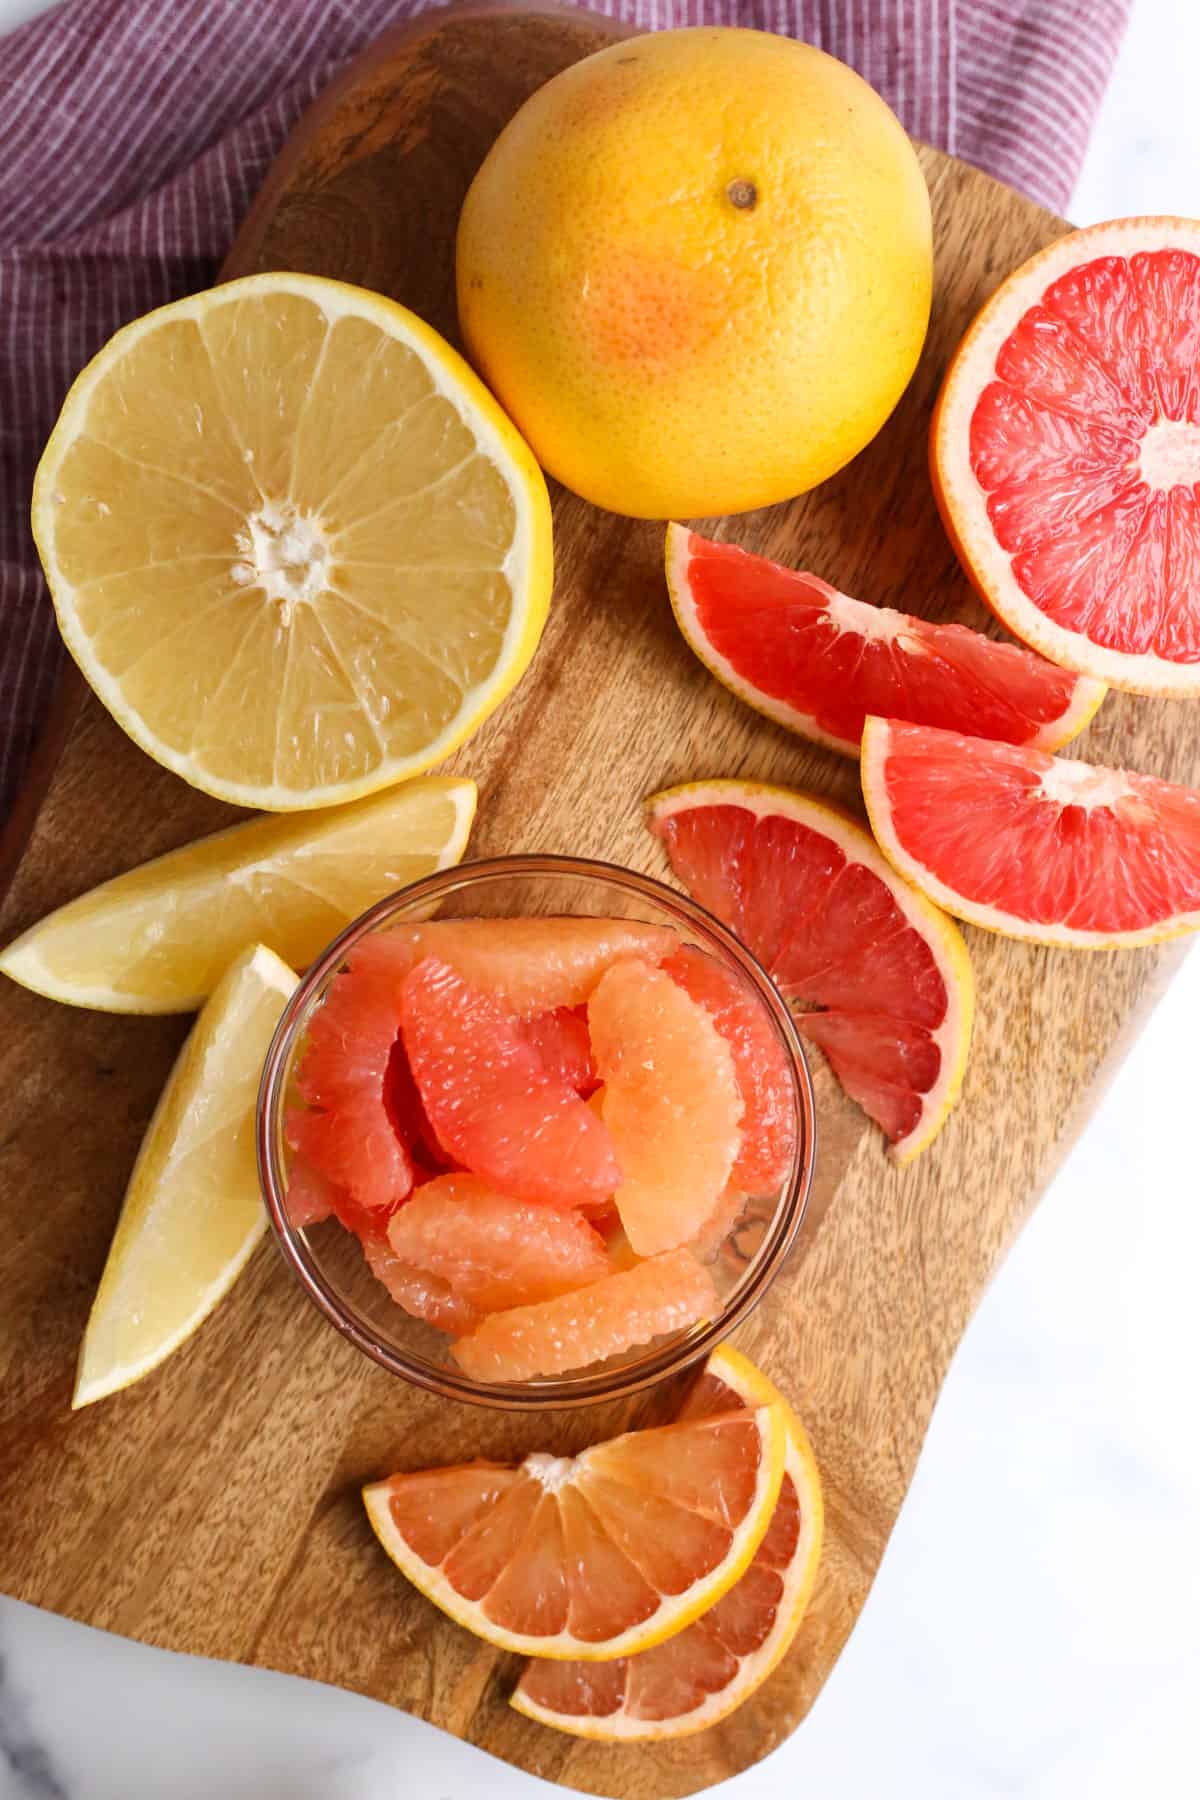 Overhead view of a small glass ramekin with grapefruit segments arranged next to grapefruit slices and wedges in varying colors